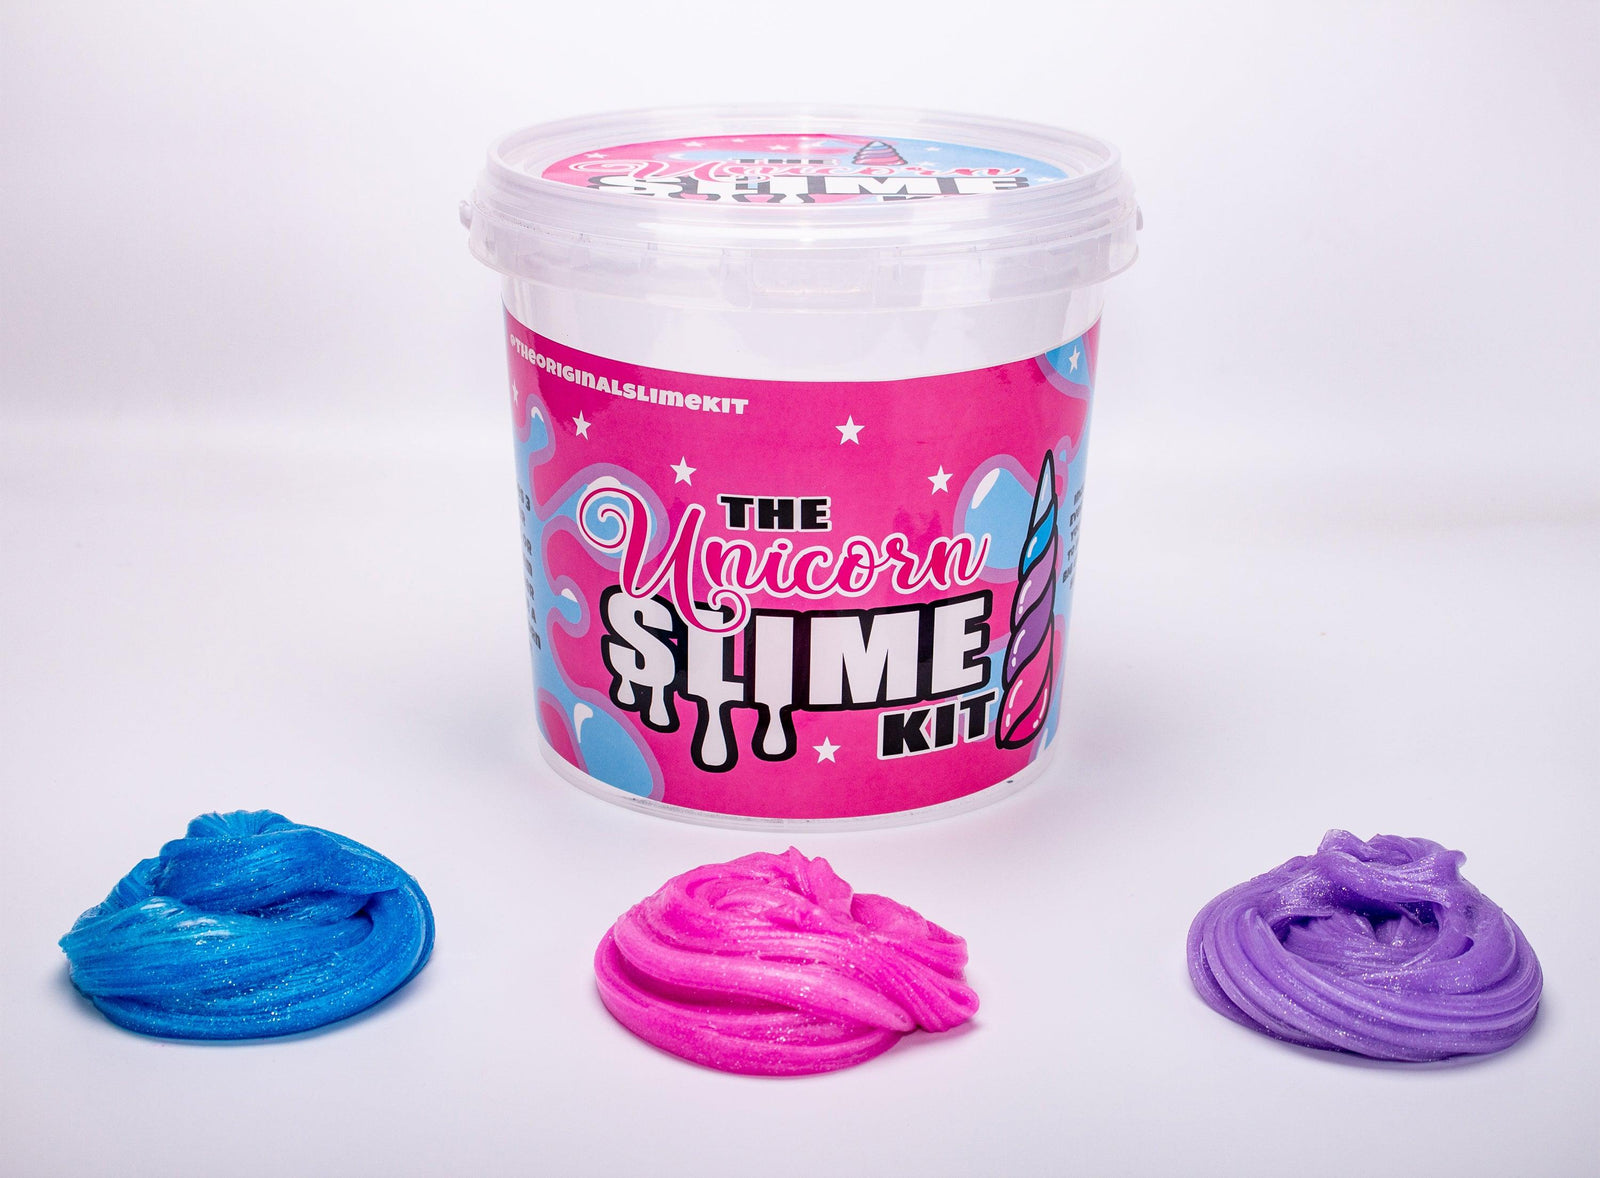 Buy The Crunchy Slime Kit by Slime Kit from Ourkids